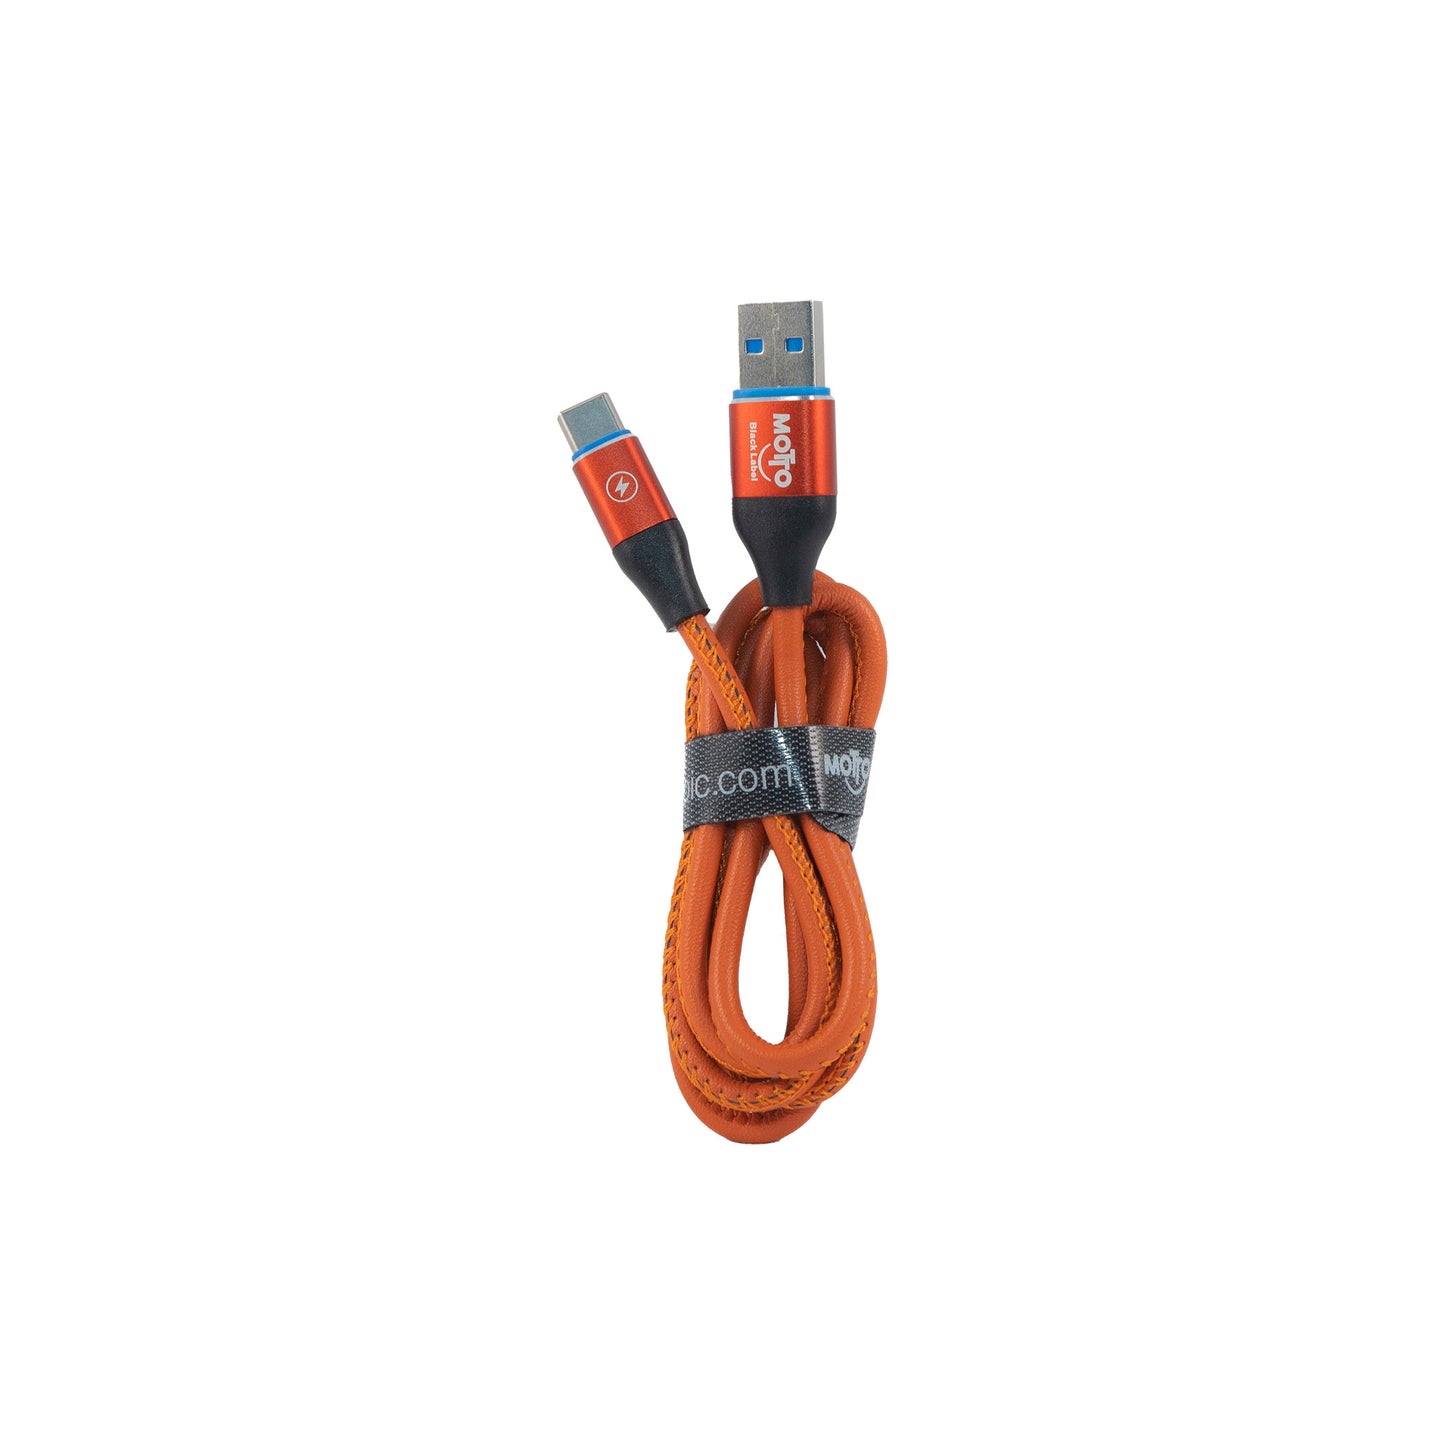 Motto Leather Wrapped Type-C Cable